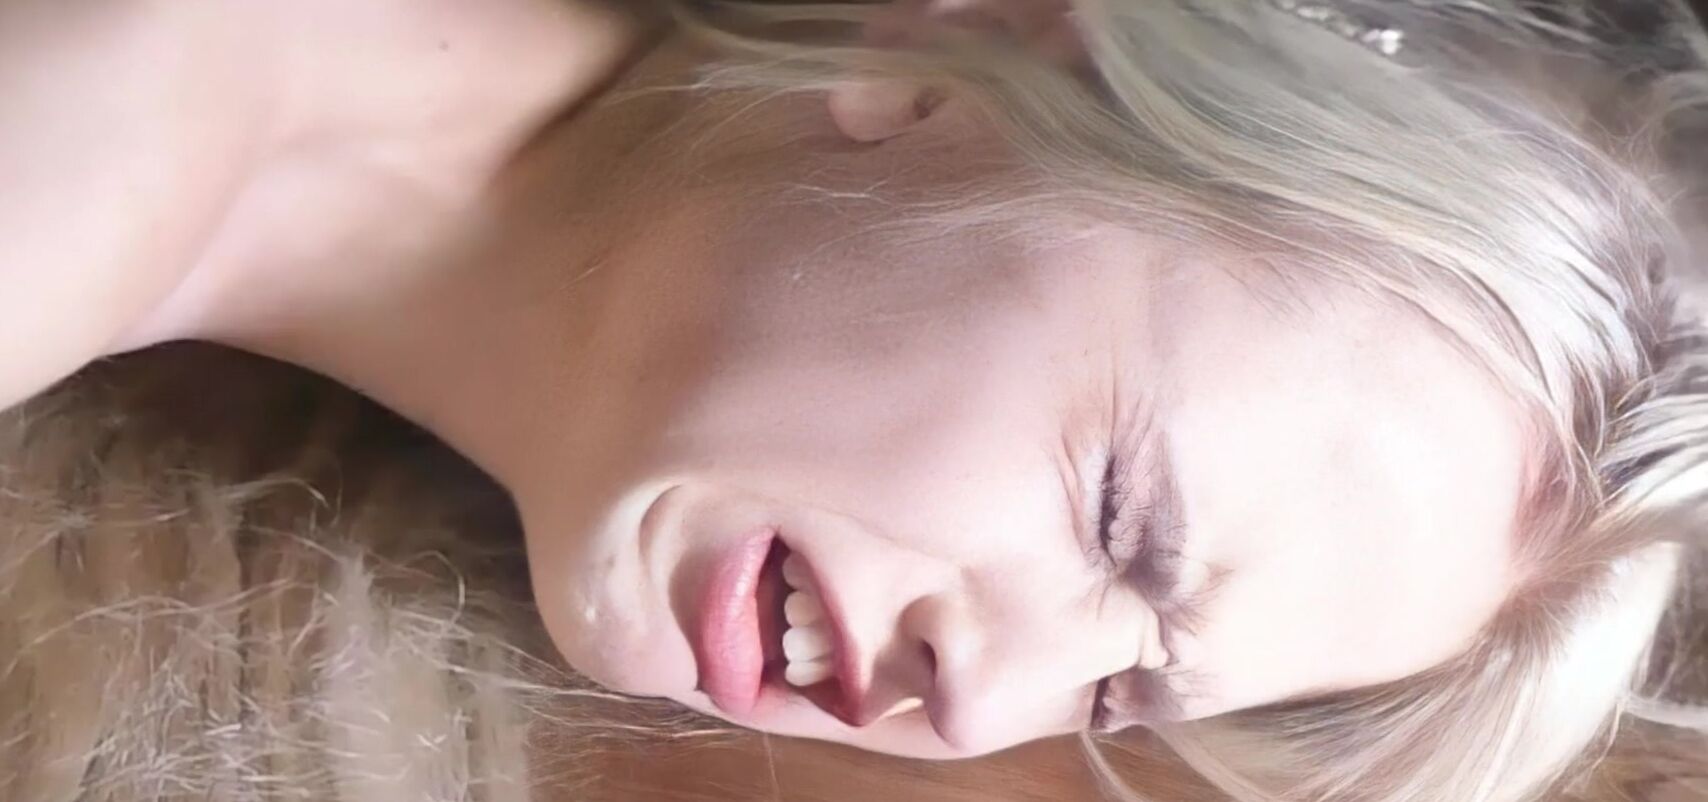 Blonde,Blond Hair And Blonde,Blond Hair NO LUBE ANAL WAS A BAD IDEA - 18 Yo Blonde Teen Can Hardly Take It (ROUGH PAINAL), Sexy Video